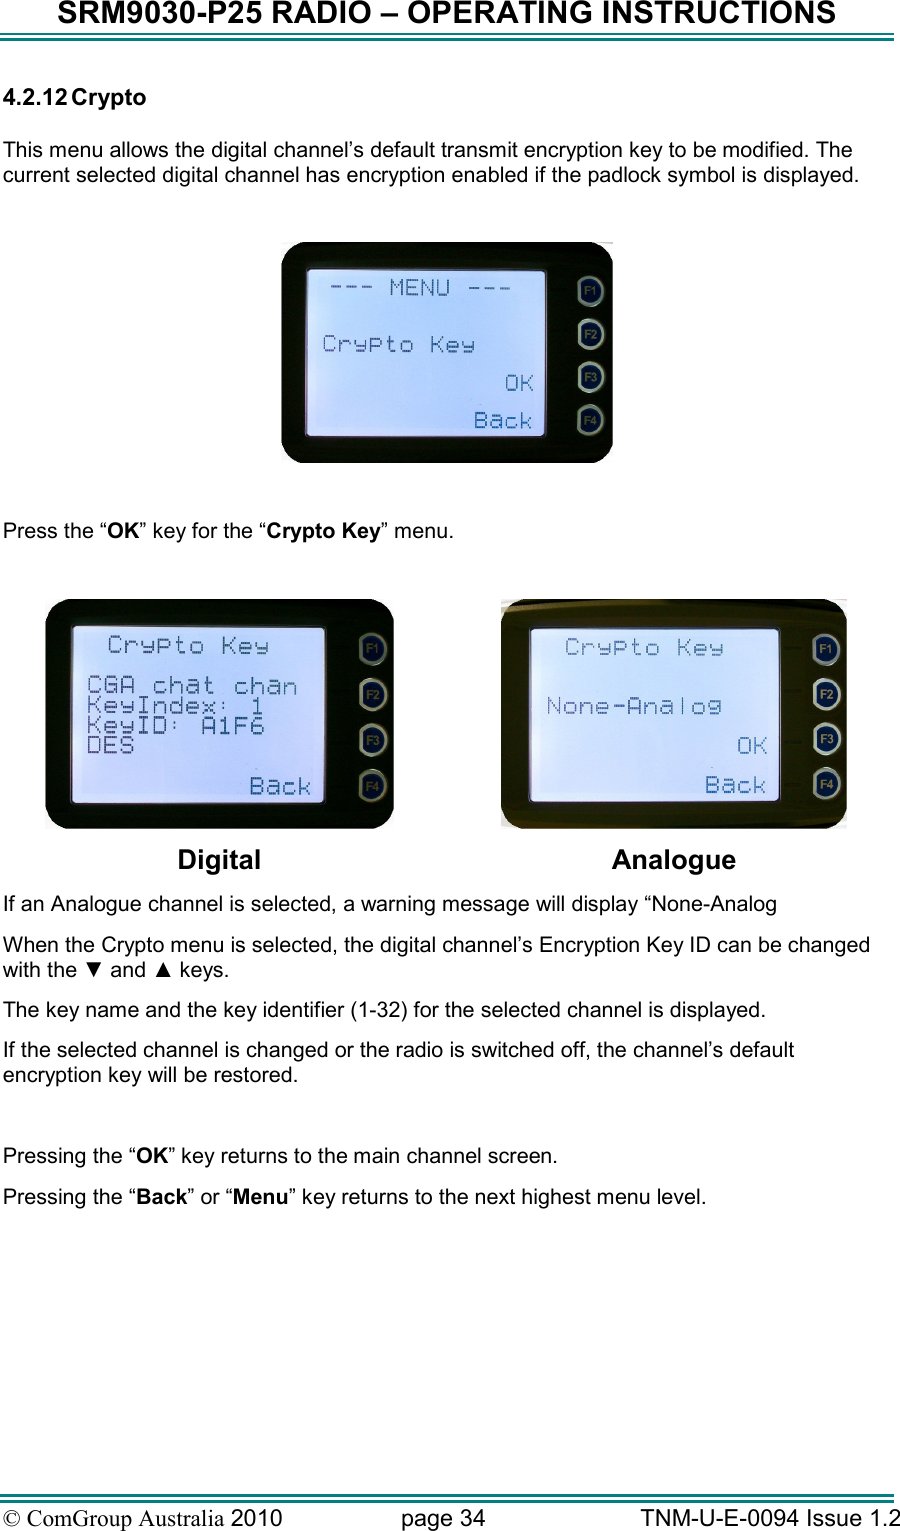 SRM9030-P25 RADIO – OPERATING INSTRUCTIONS © ComGroup Australia 2010  page 34   TNM-U-E-0094 Issue 1.2 4.2.12 Crypto  This menu allows the digital channel’s default transmit encryption key to be modified. The current selected digital channel has encryption enabled if the padlock symbol is displayed.    Press the “OK” key for the “Crypto Key” menu.    Digital  Analogue If an Analogue channel is selected, a warning message will display “None-Analog When the Crypto menu is selected, the digital channel’s Encryption Key ID can be changed with the ▼ and ▲ keys.   The key name and the key identifier (1-32) for the selected channel is displayed. If the selected channel is changed or the radio is switched off, the channel’s default encryption key will be restored.  Pressing the “OK” key returns to the main channel screen.   Pressing the “Back” or “Menu” key returns to the next highest menu level. 